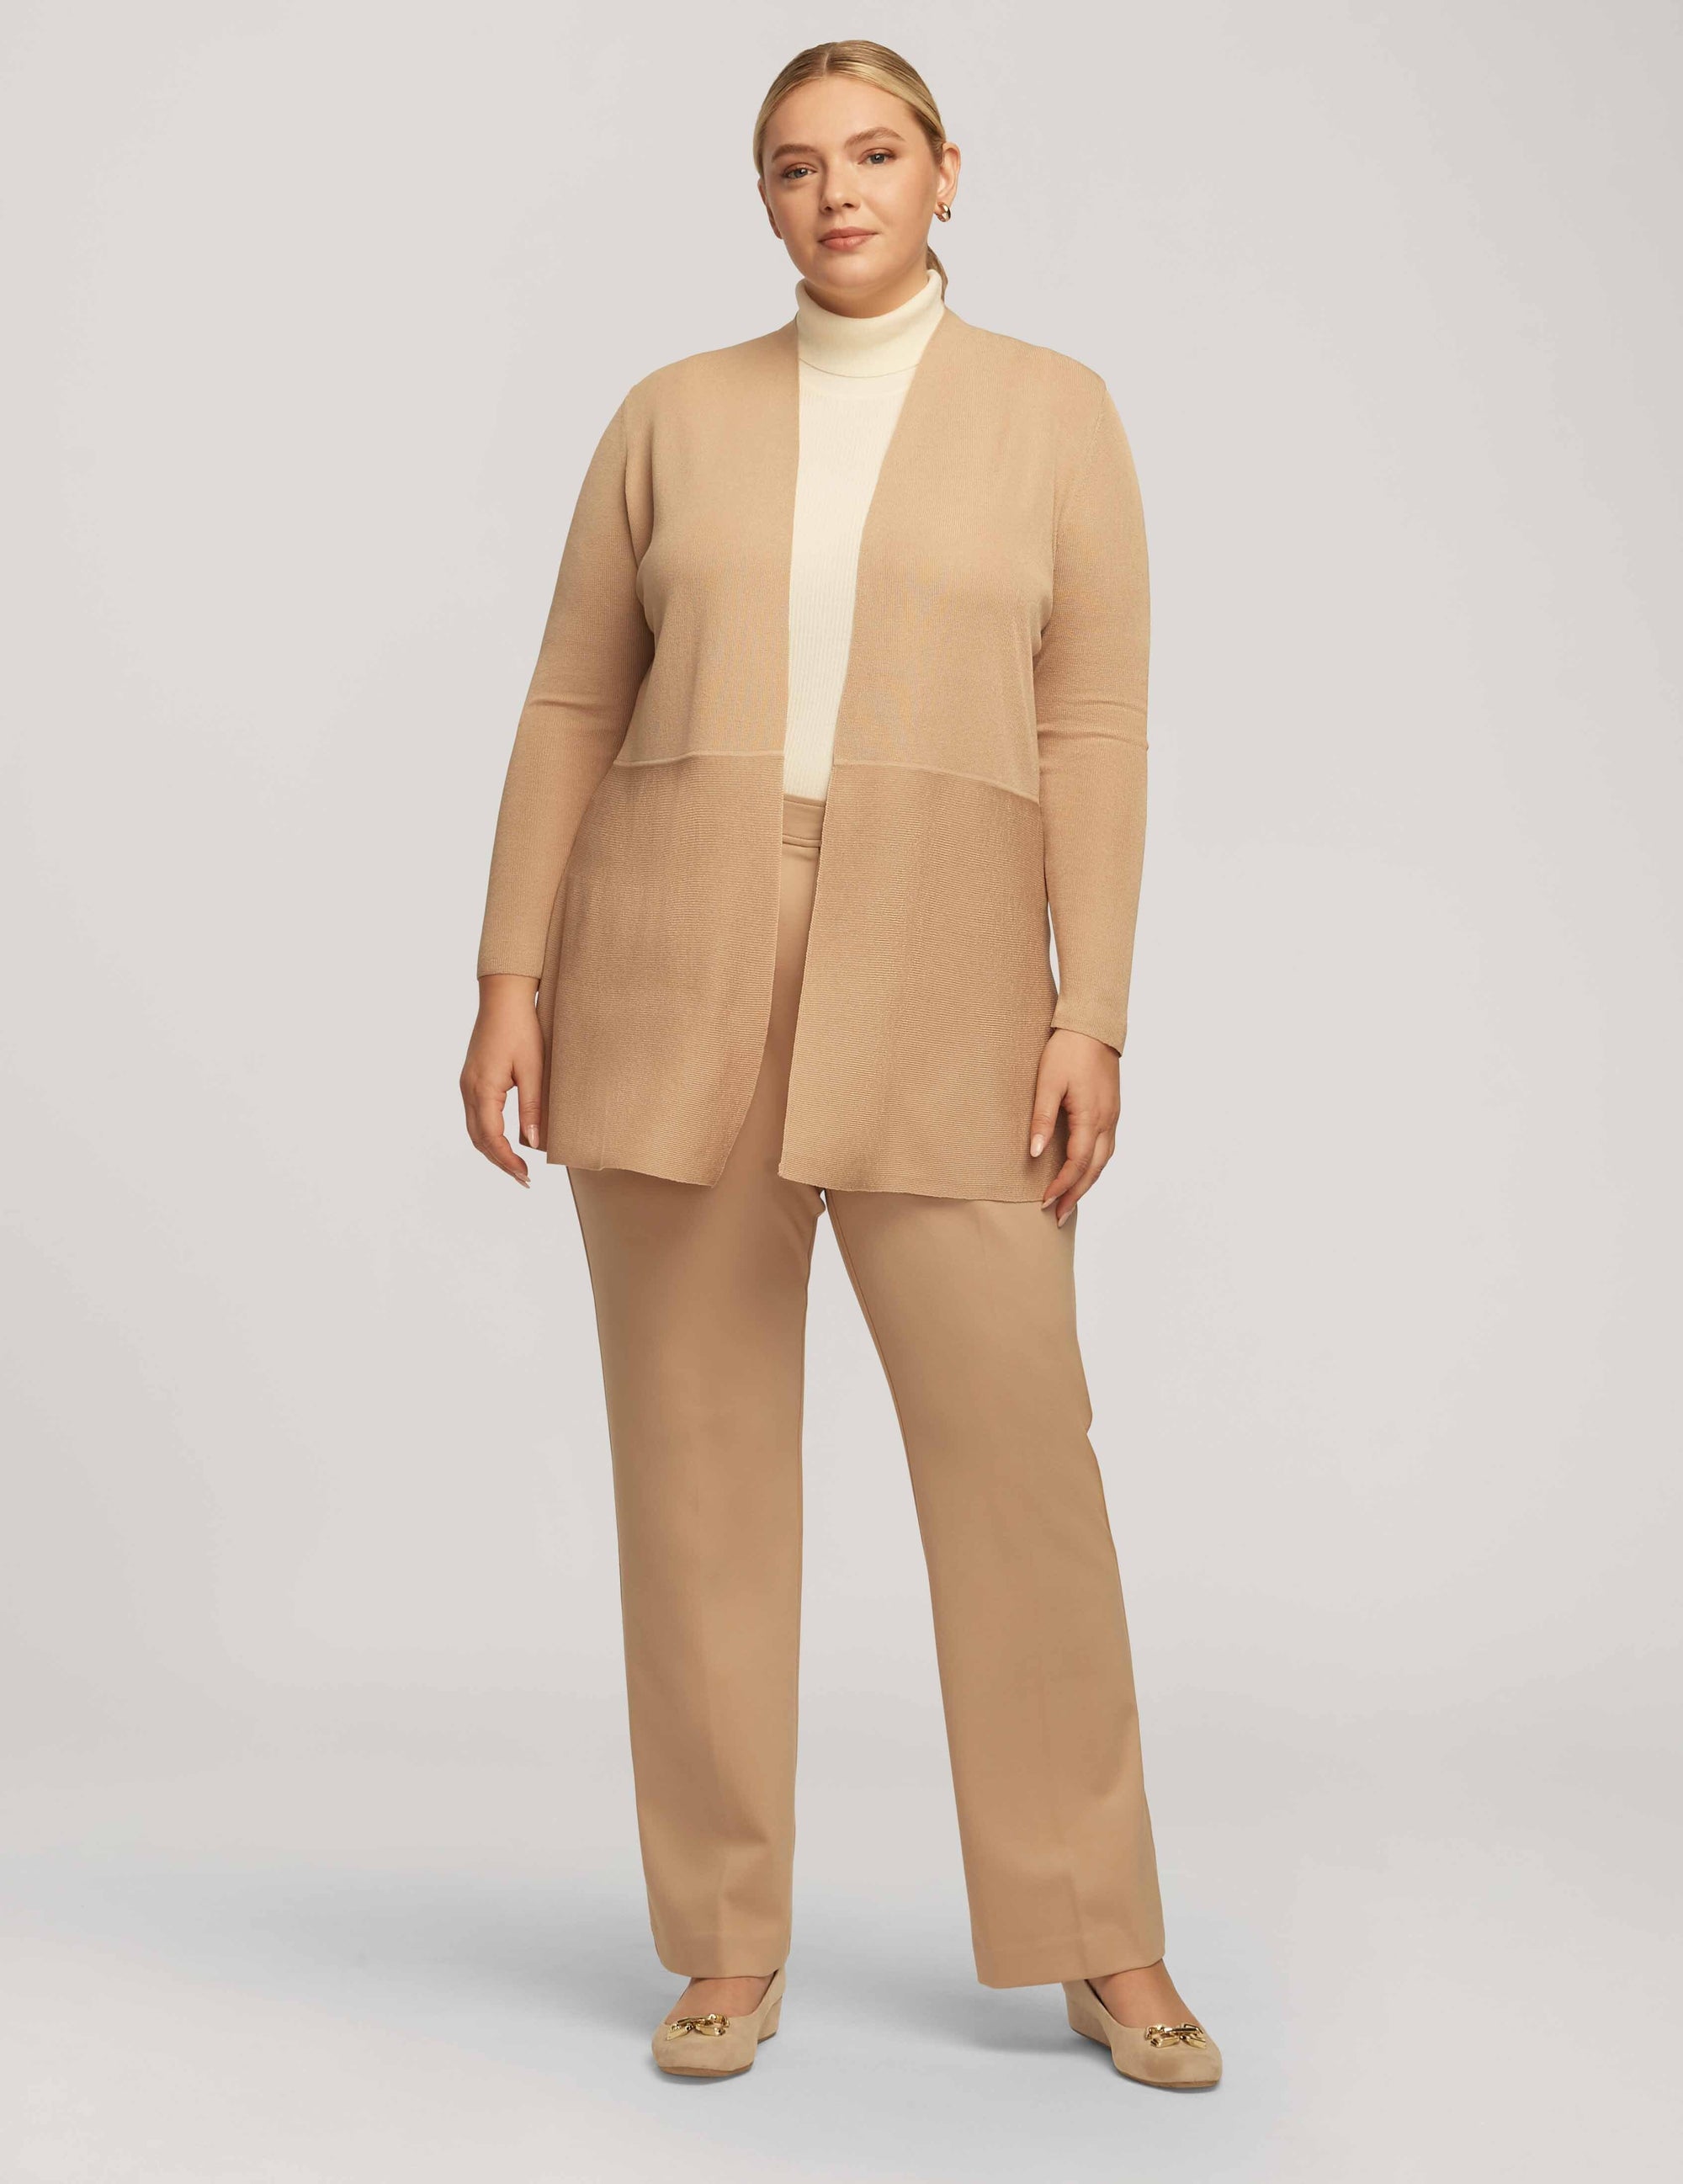 Clothing - Extended Sizes - Anne Klein